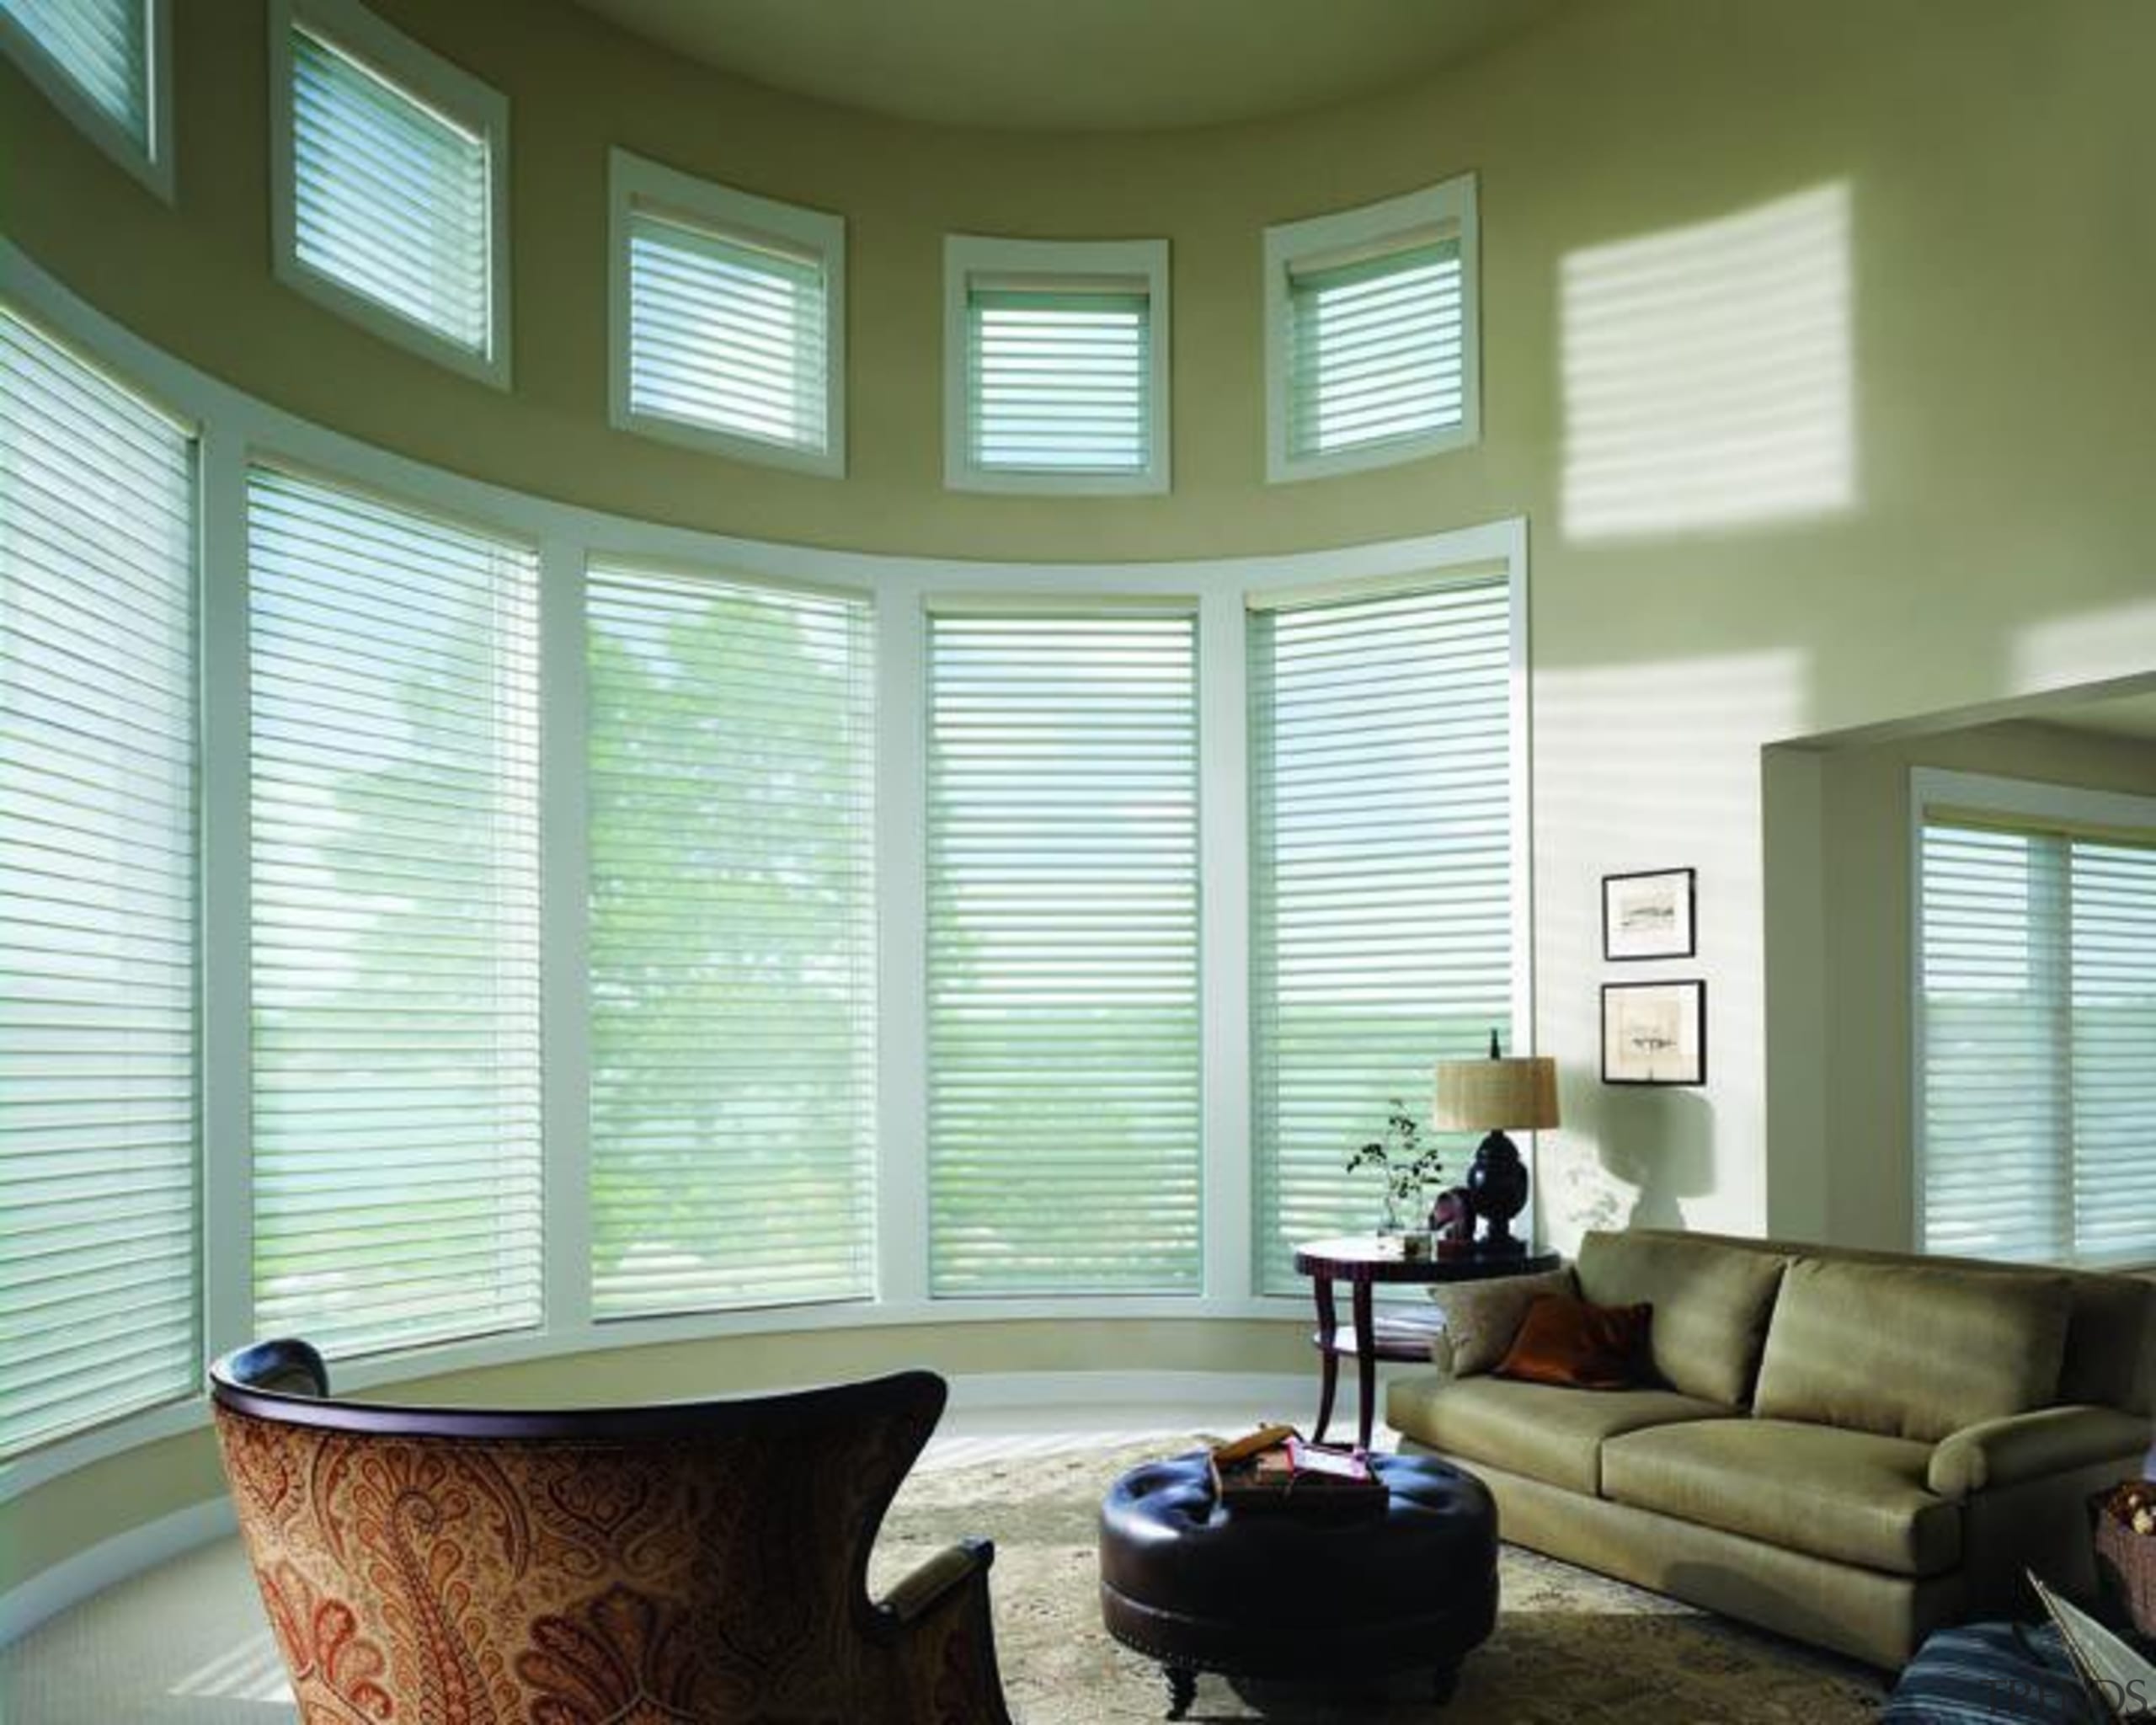 luxaflex silhouette shadings - luxaflex silhouette shadings - ceiling, daylighting, home, interior design, living room, shade, window, window blind, window covering, window treatment, wood, teal, brown